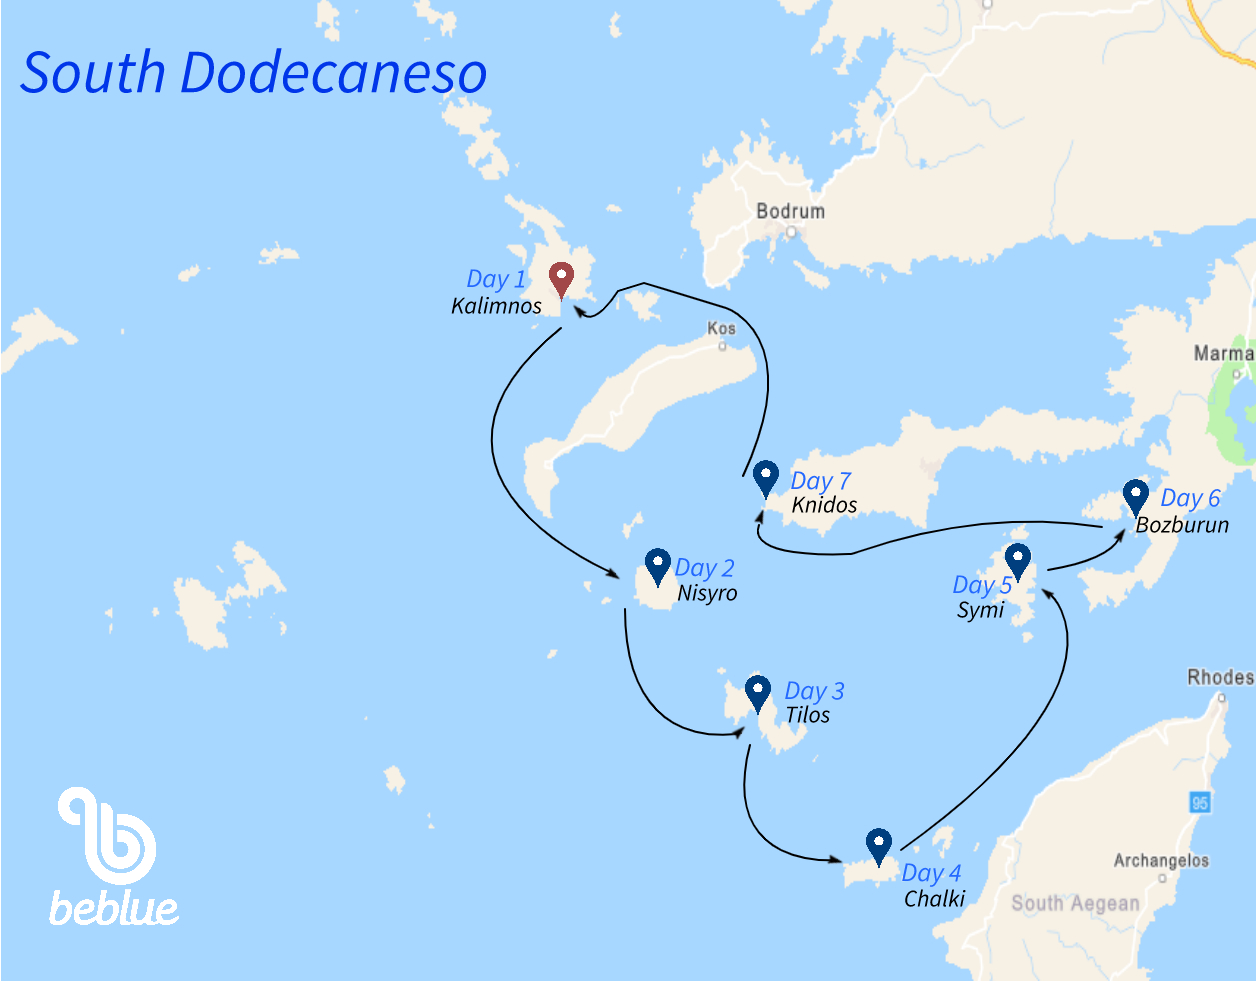 Dodecanese Islands South - ID 103